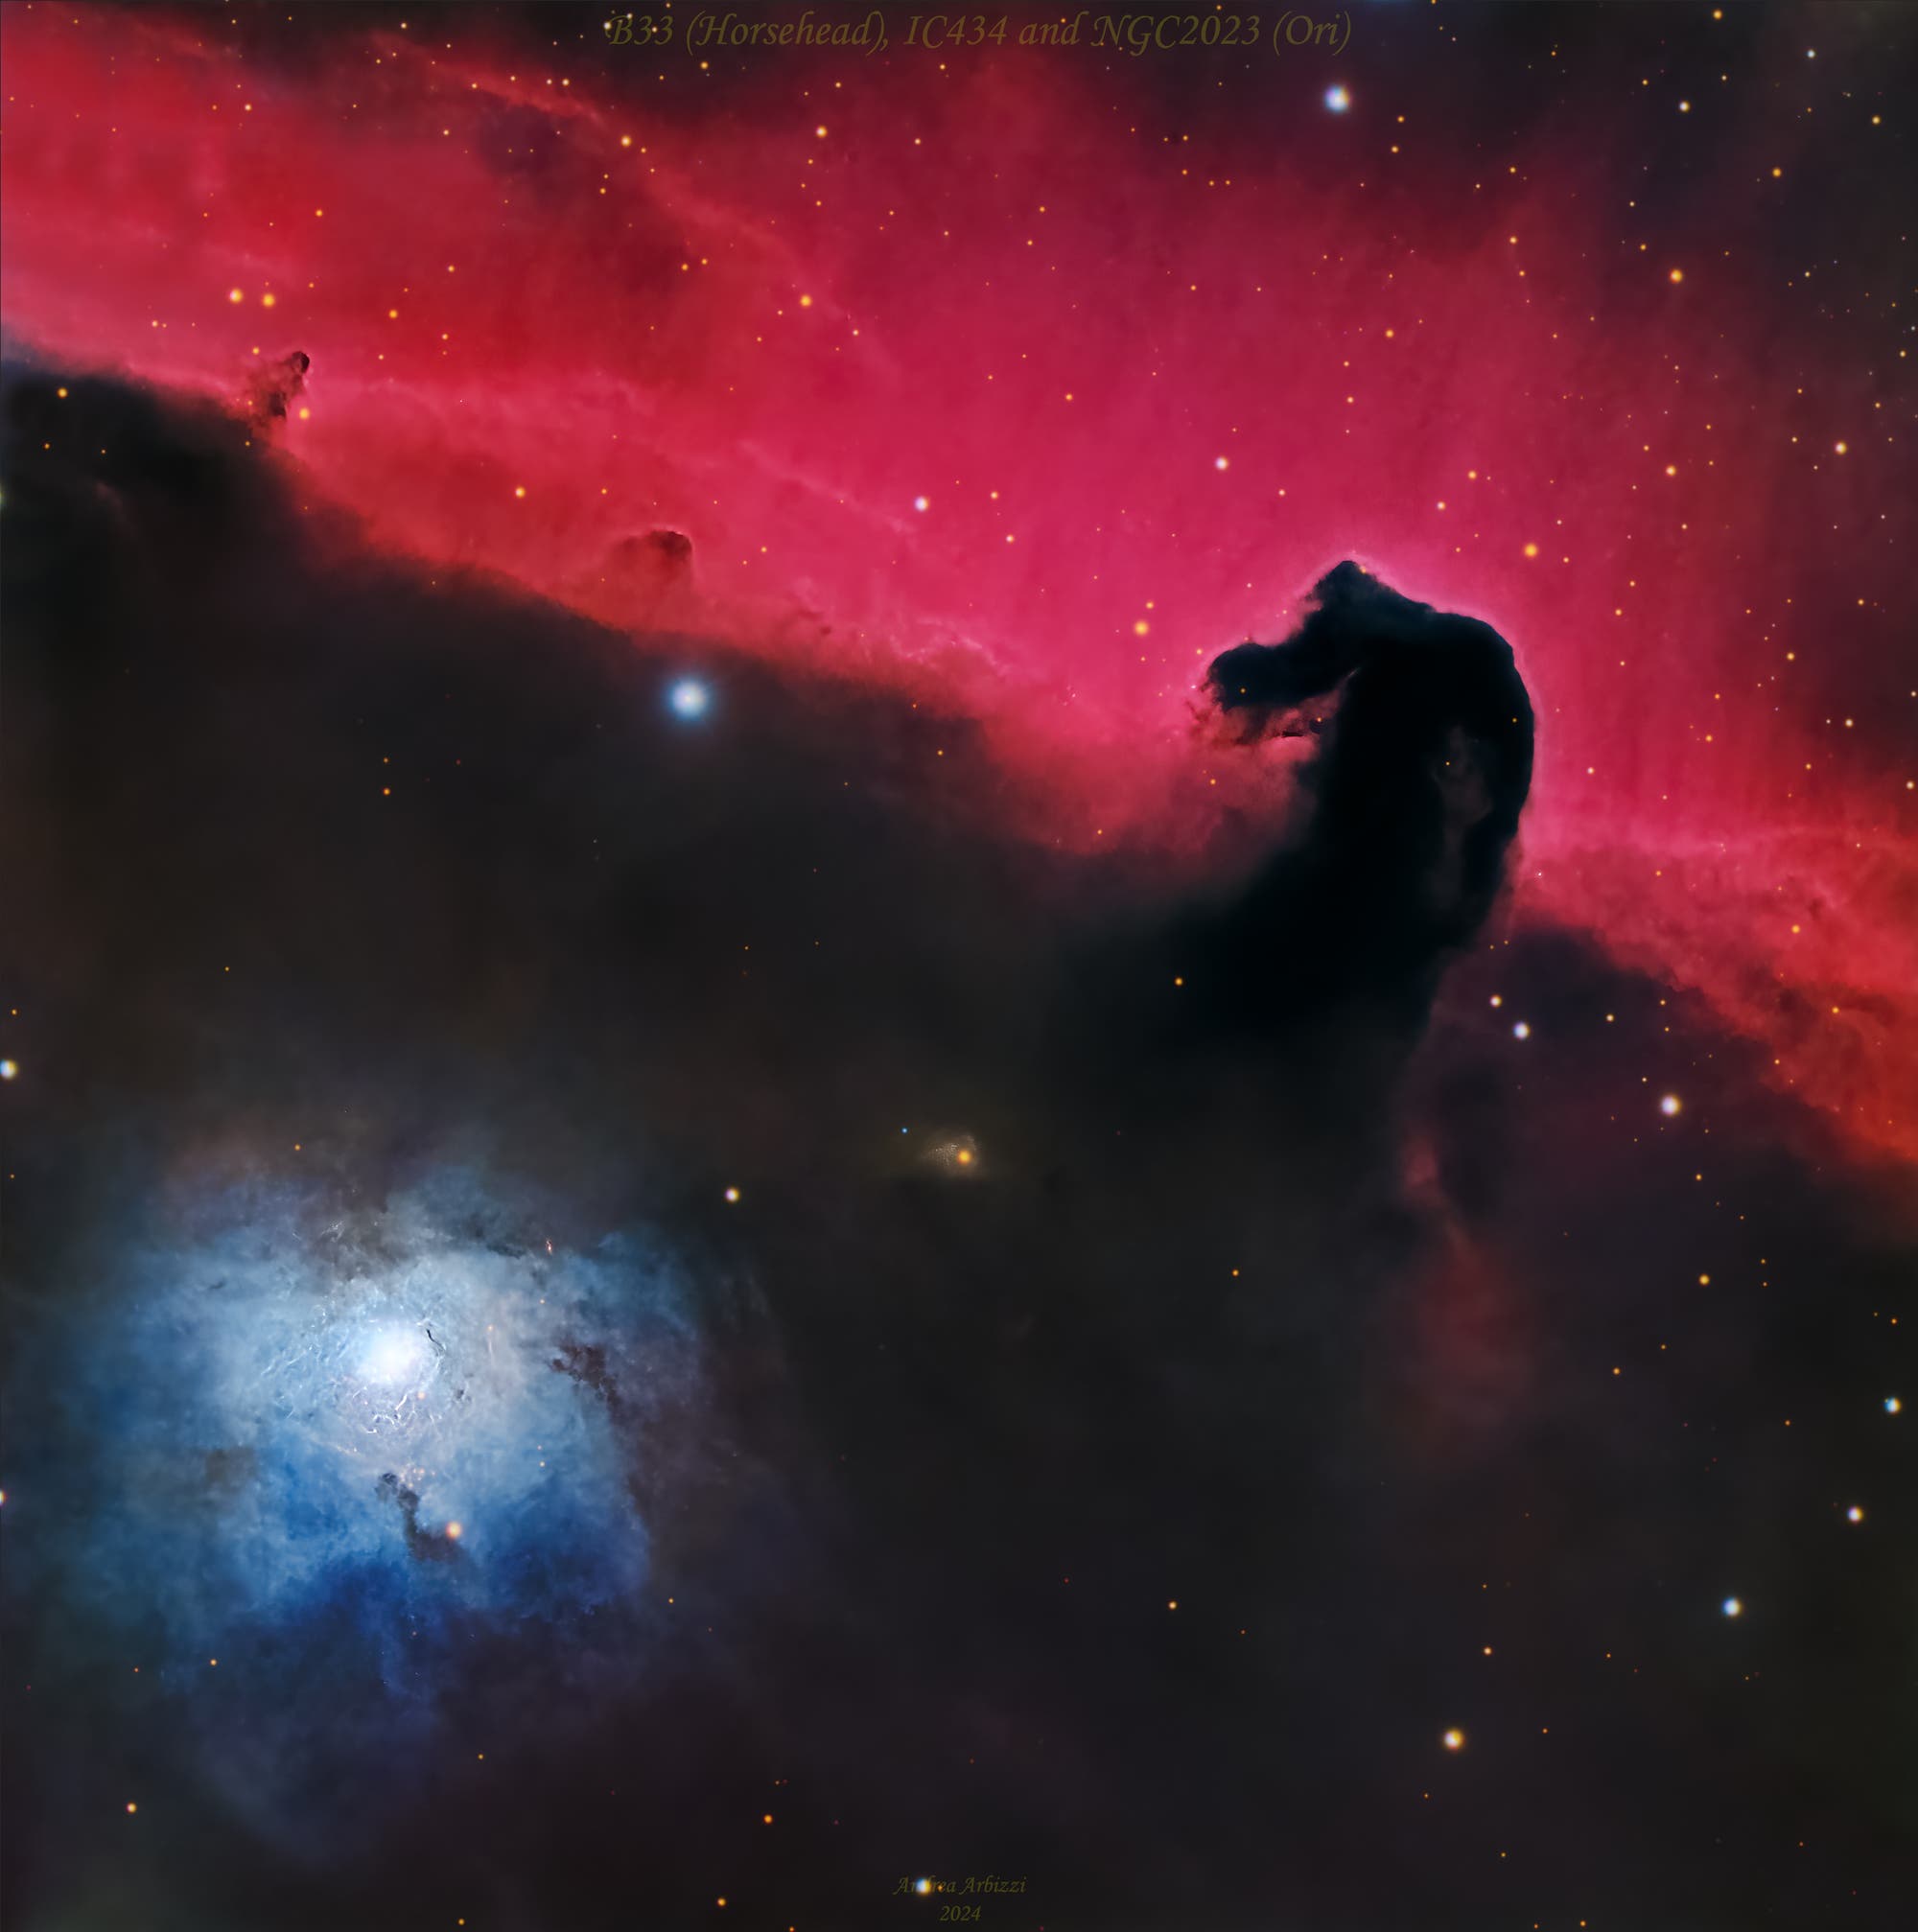 A magnificent 3 nebulas in Orion: IC434, B33 (Horsehead) and NGC 2023